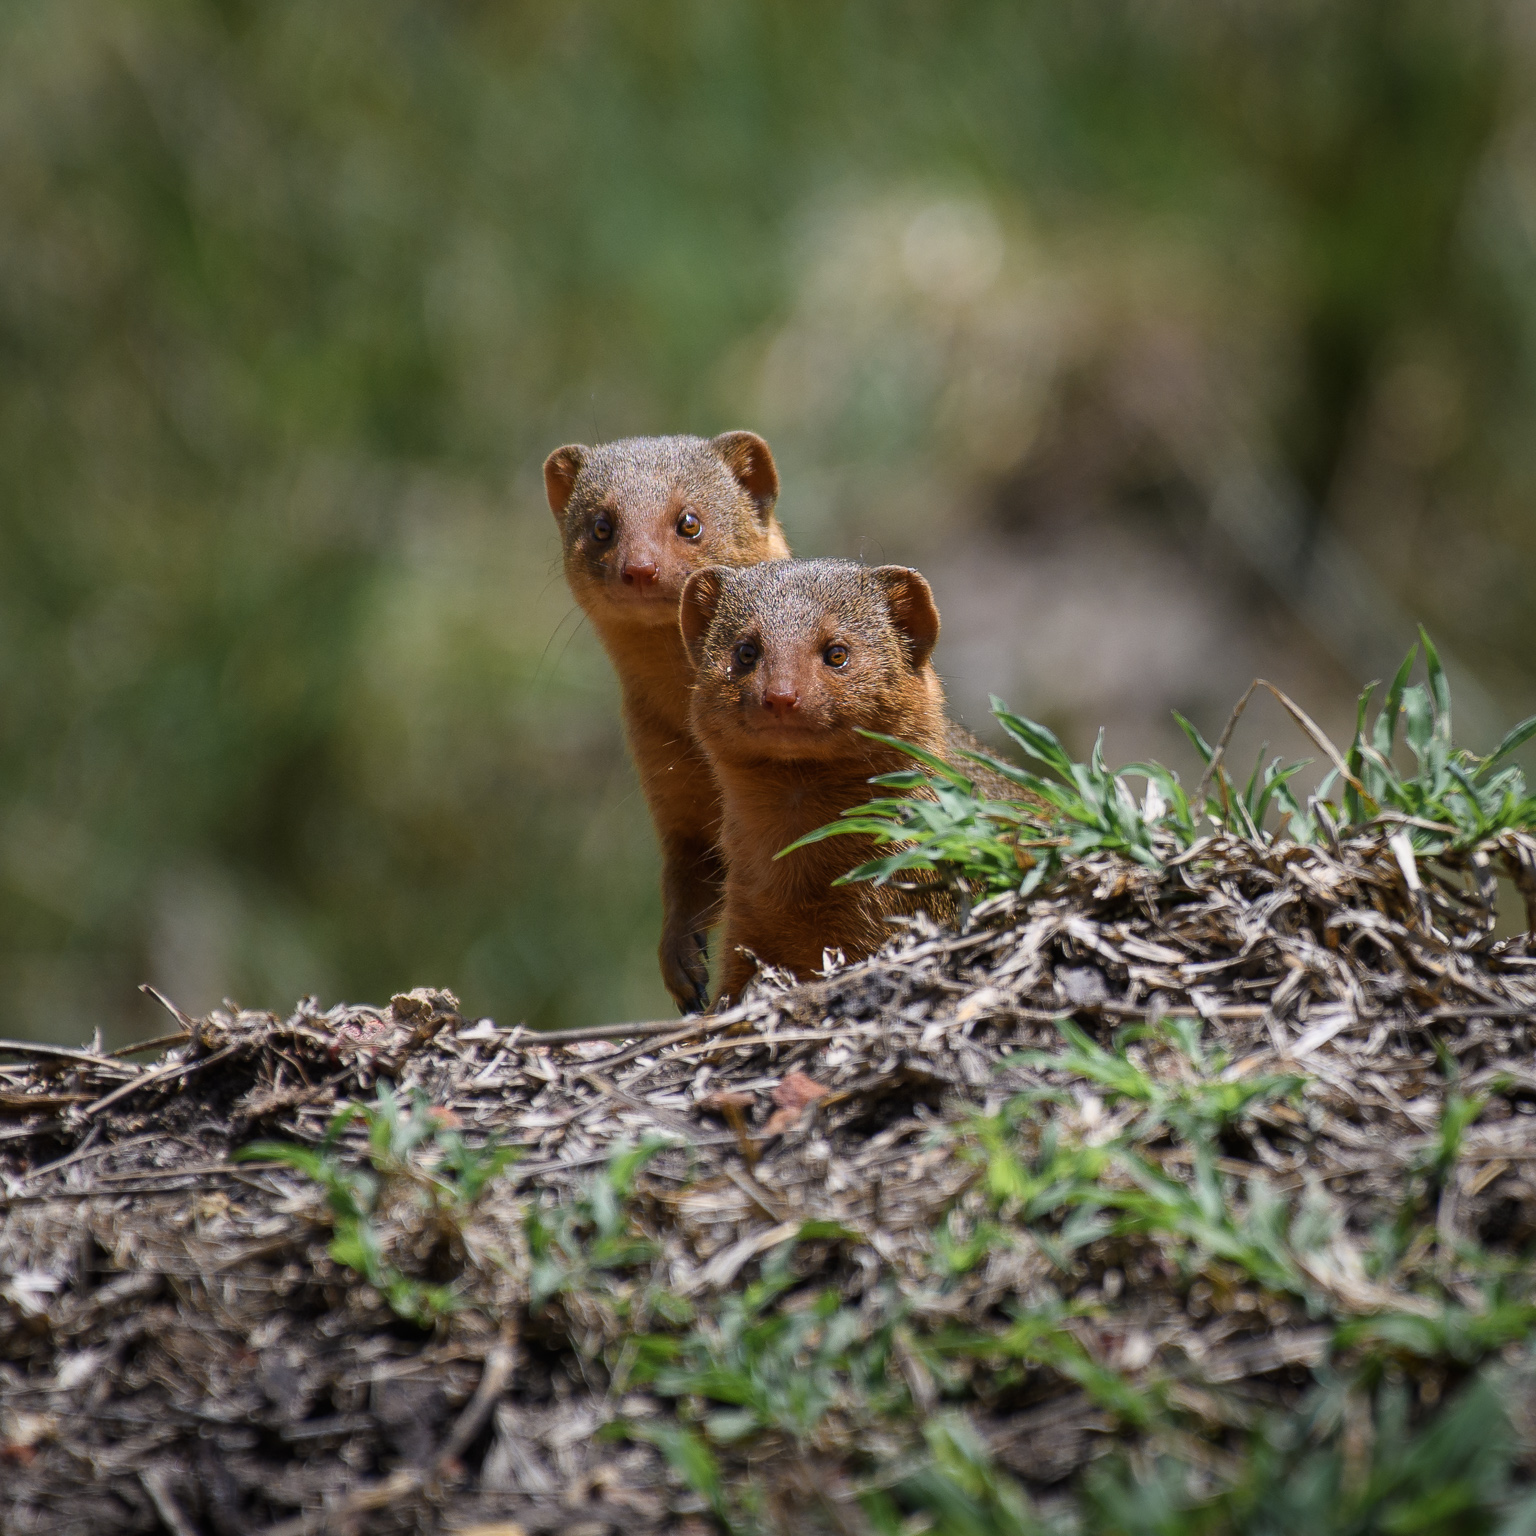 A pair of curious dwarf mongoose staring at the photographer in Masai mara Africa